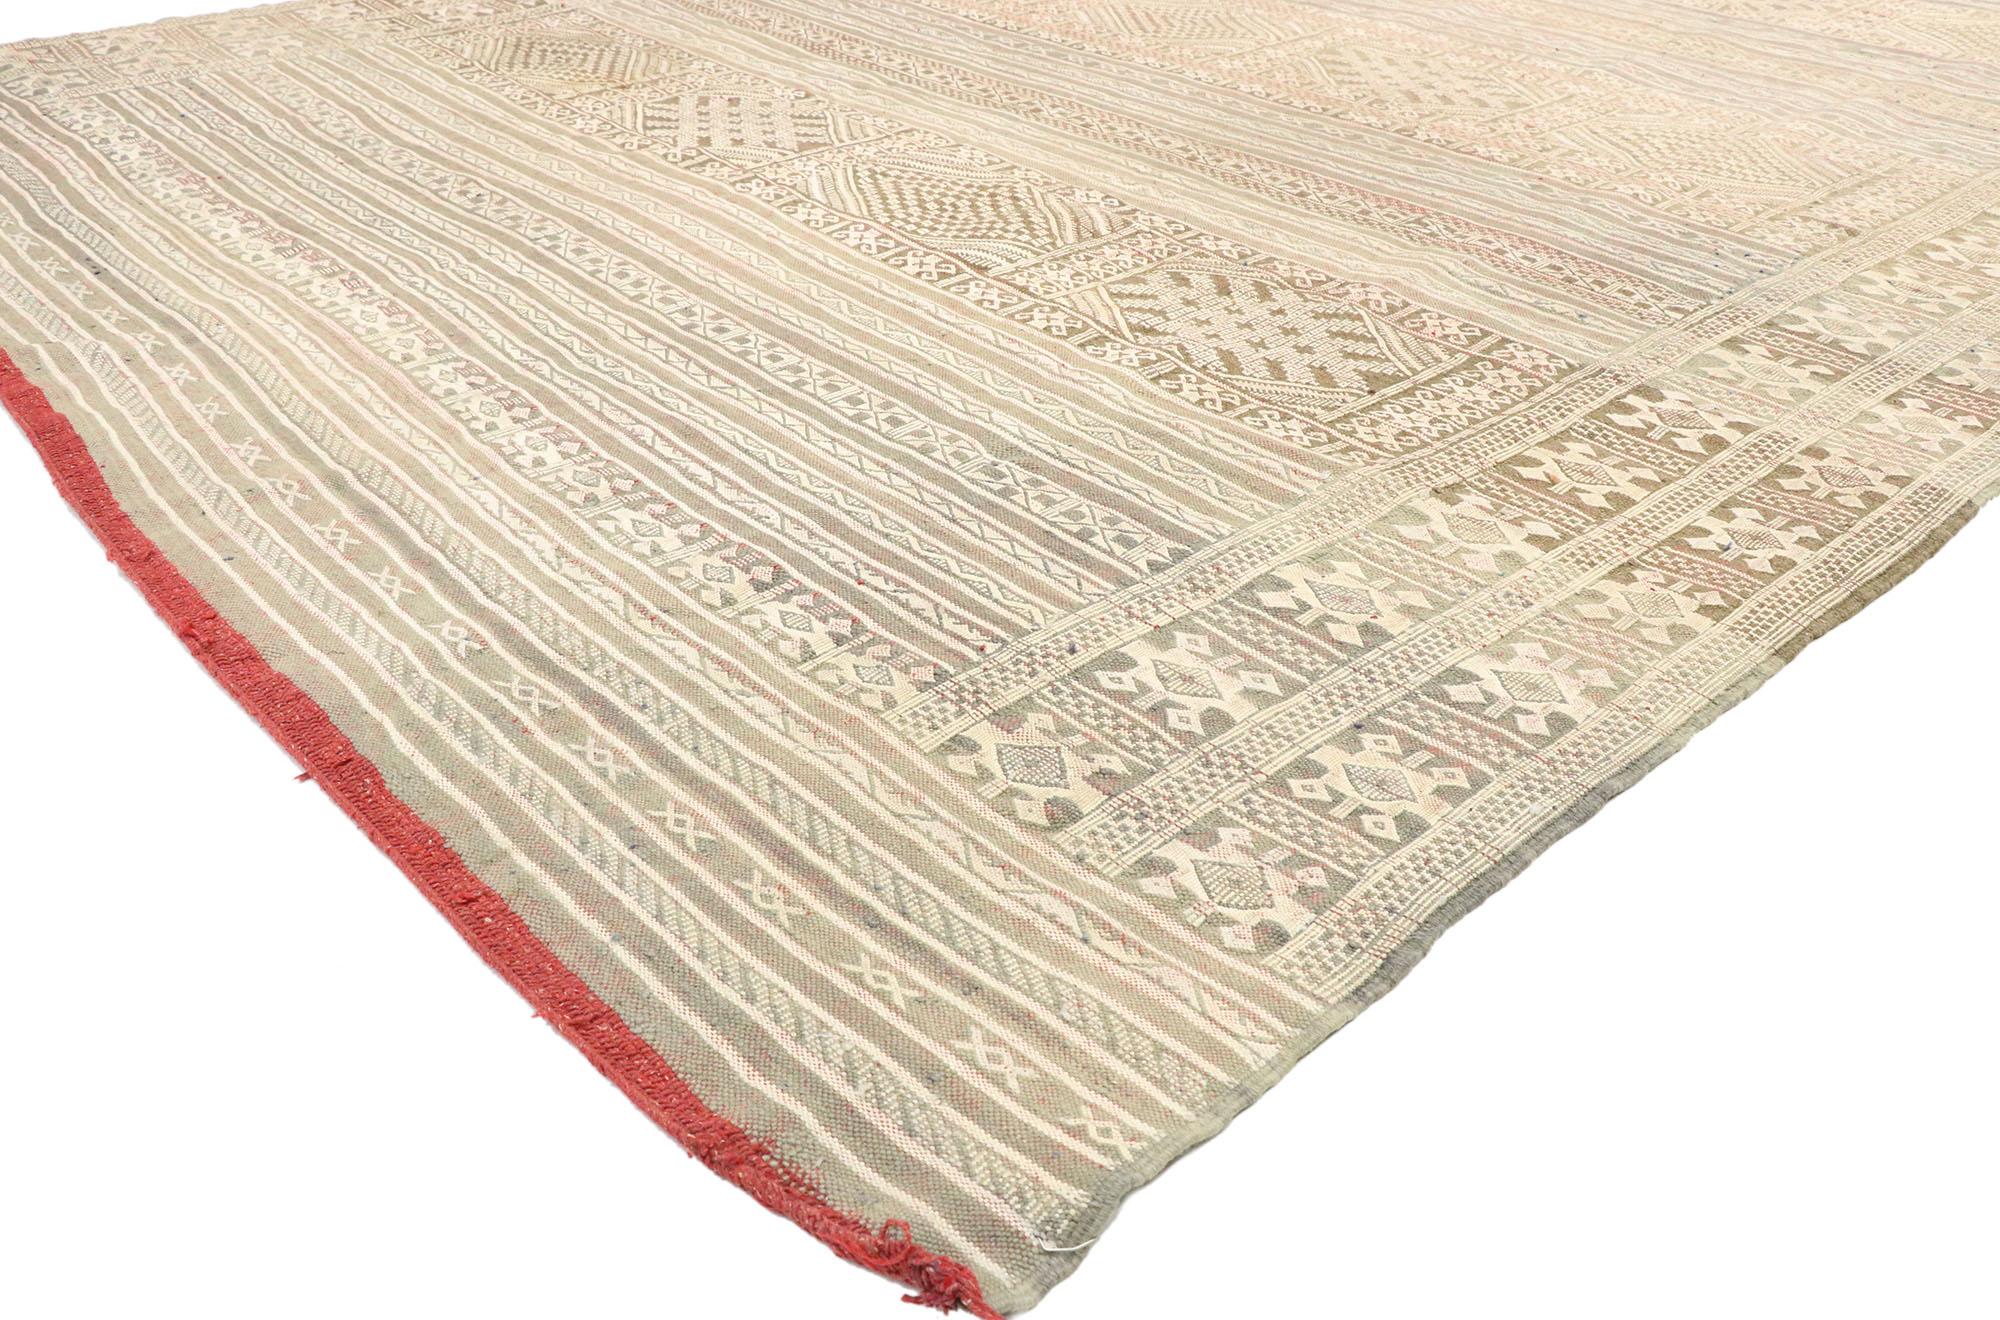 20782, vintage Moroccan Zemmour Berber Kilim area rug with Bohemian Tribal style. This handwoven wool vintage Moroccan Zemmour Berber Kilim rug features an all-over geometric pattern. It beautifully displays alternating rows of wide bands and